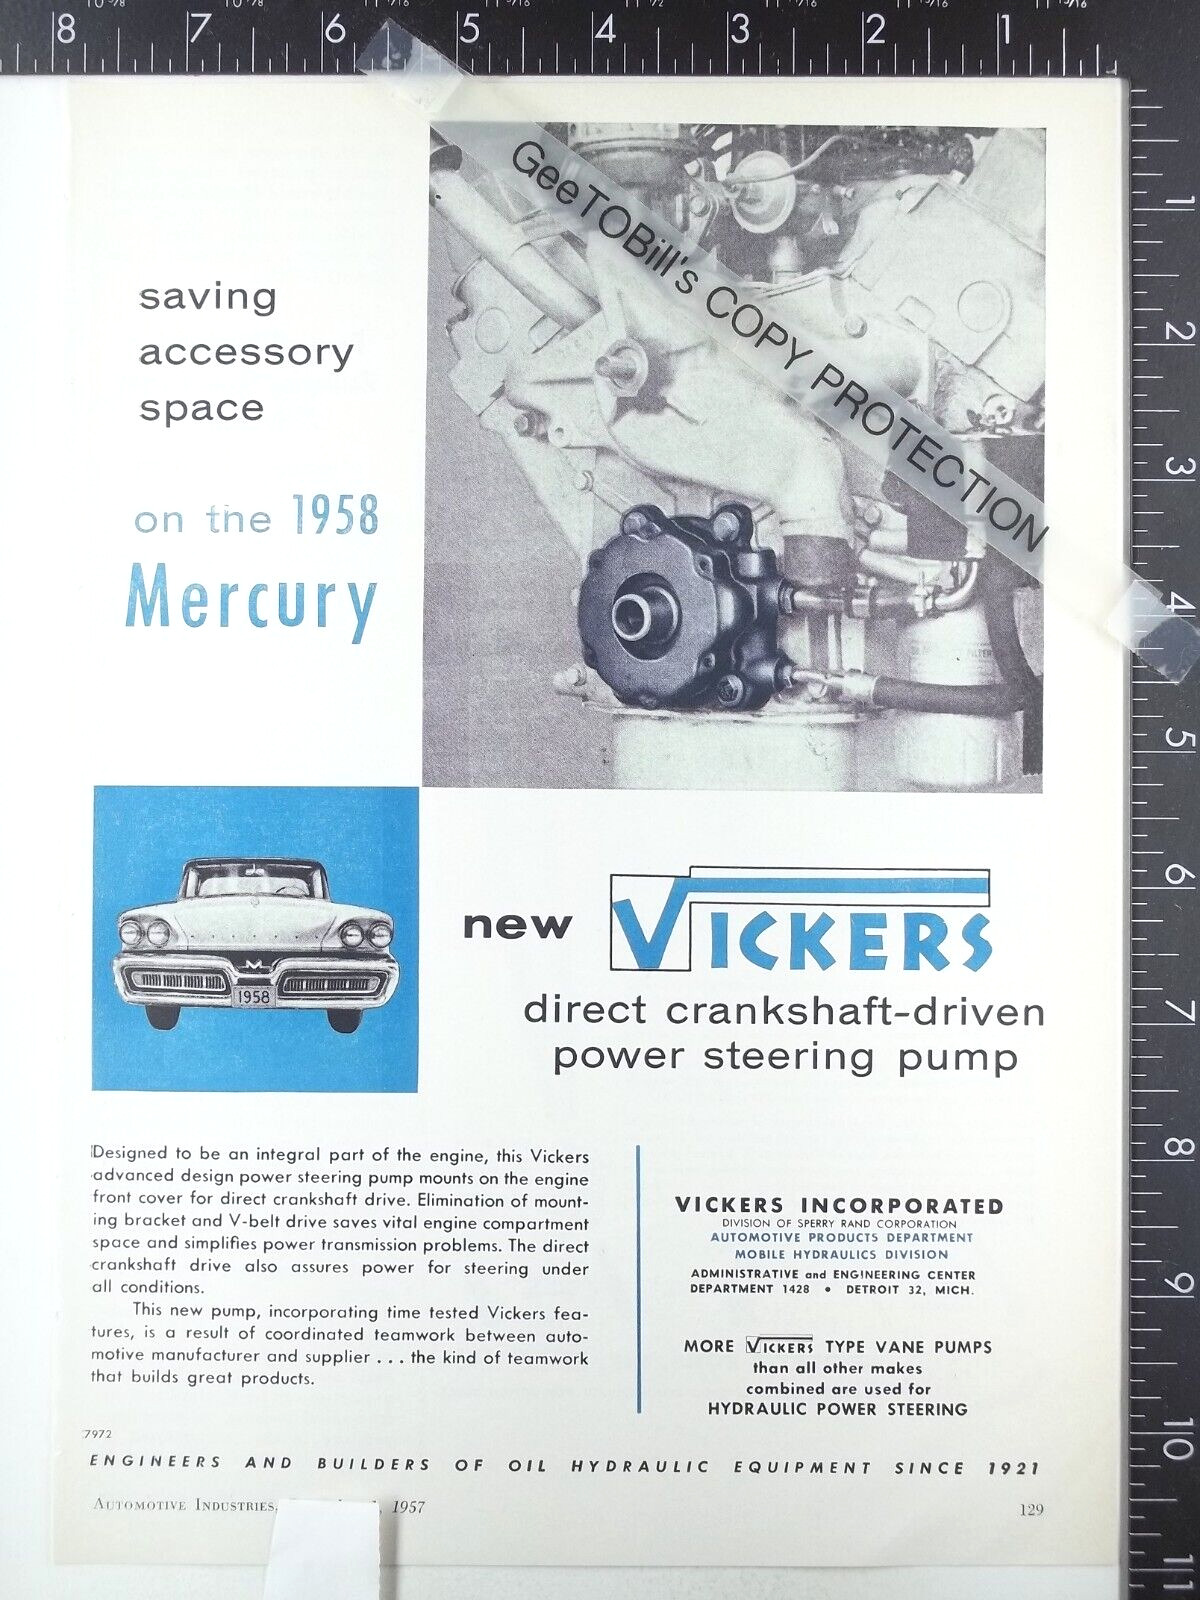 1957 ADVERTISING for Vickers Inc power steering pumps for 1958 Mercury Park Lane